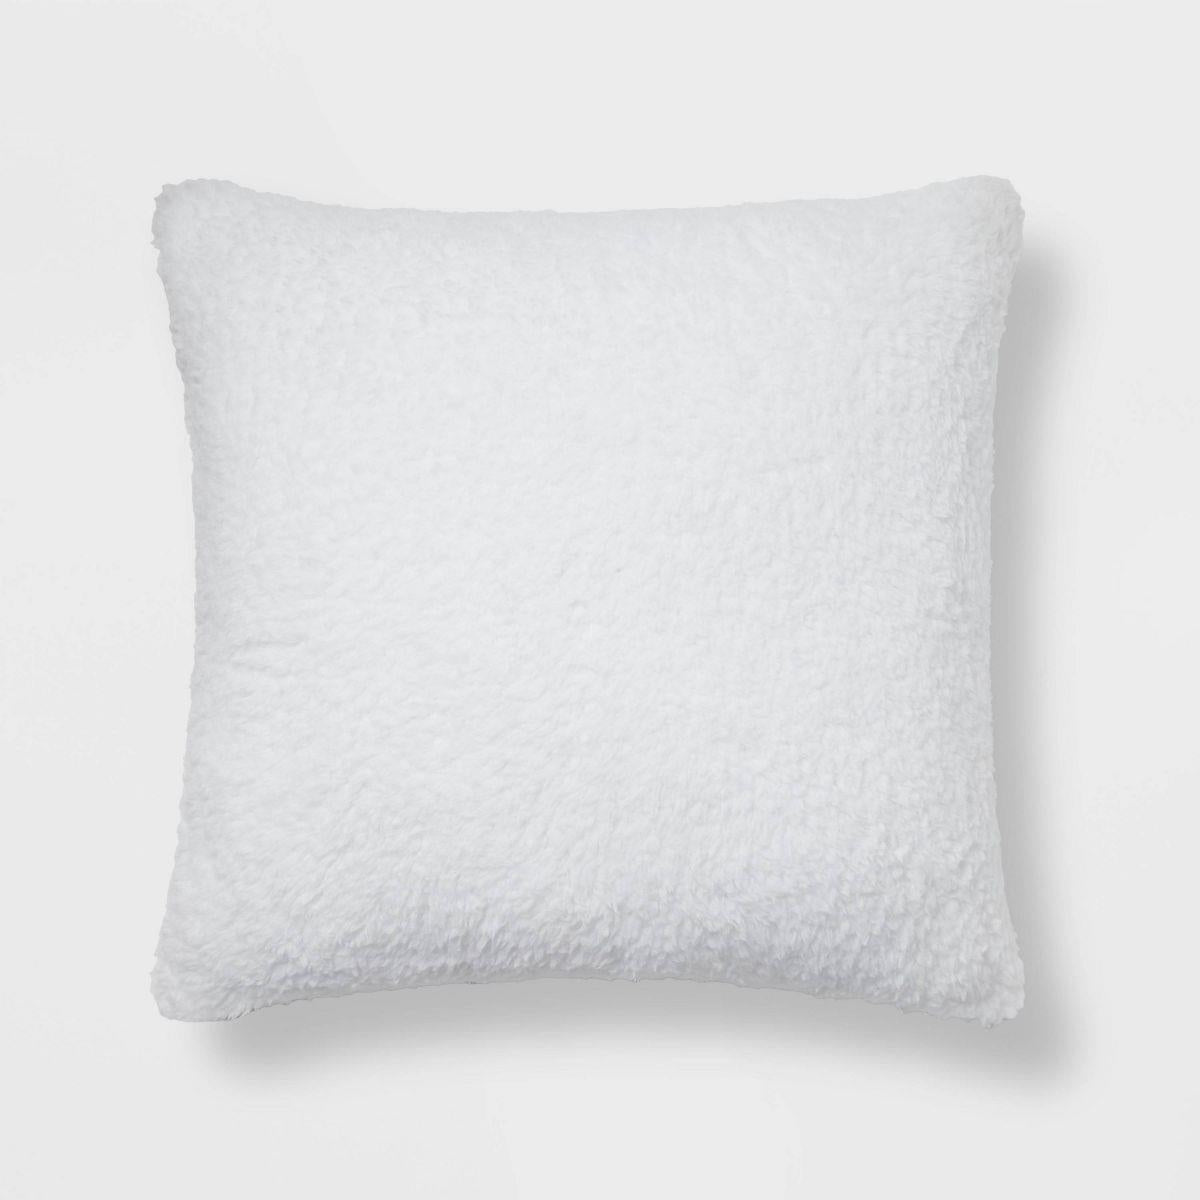 Oversized Sherpa Square Pillow Light Peach - Room Essentials™